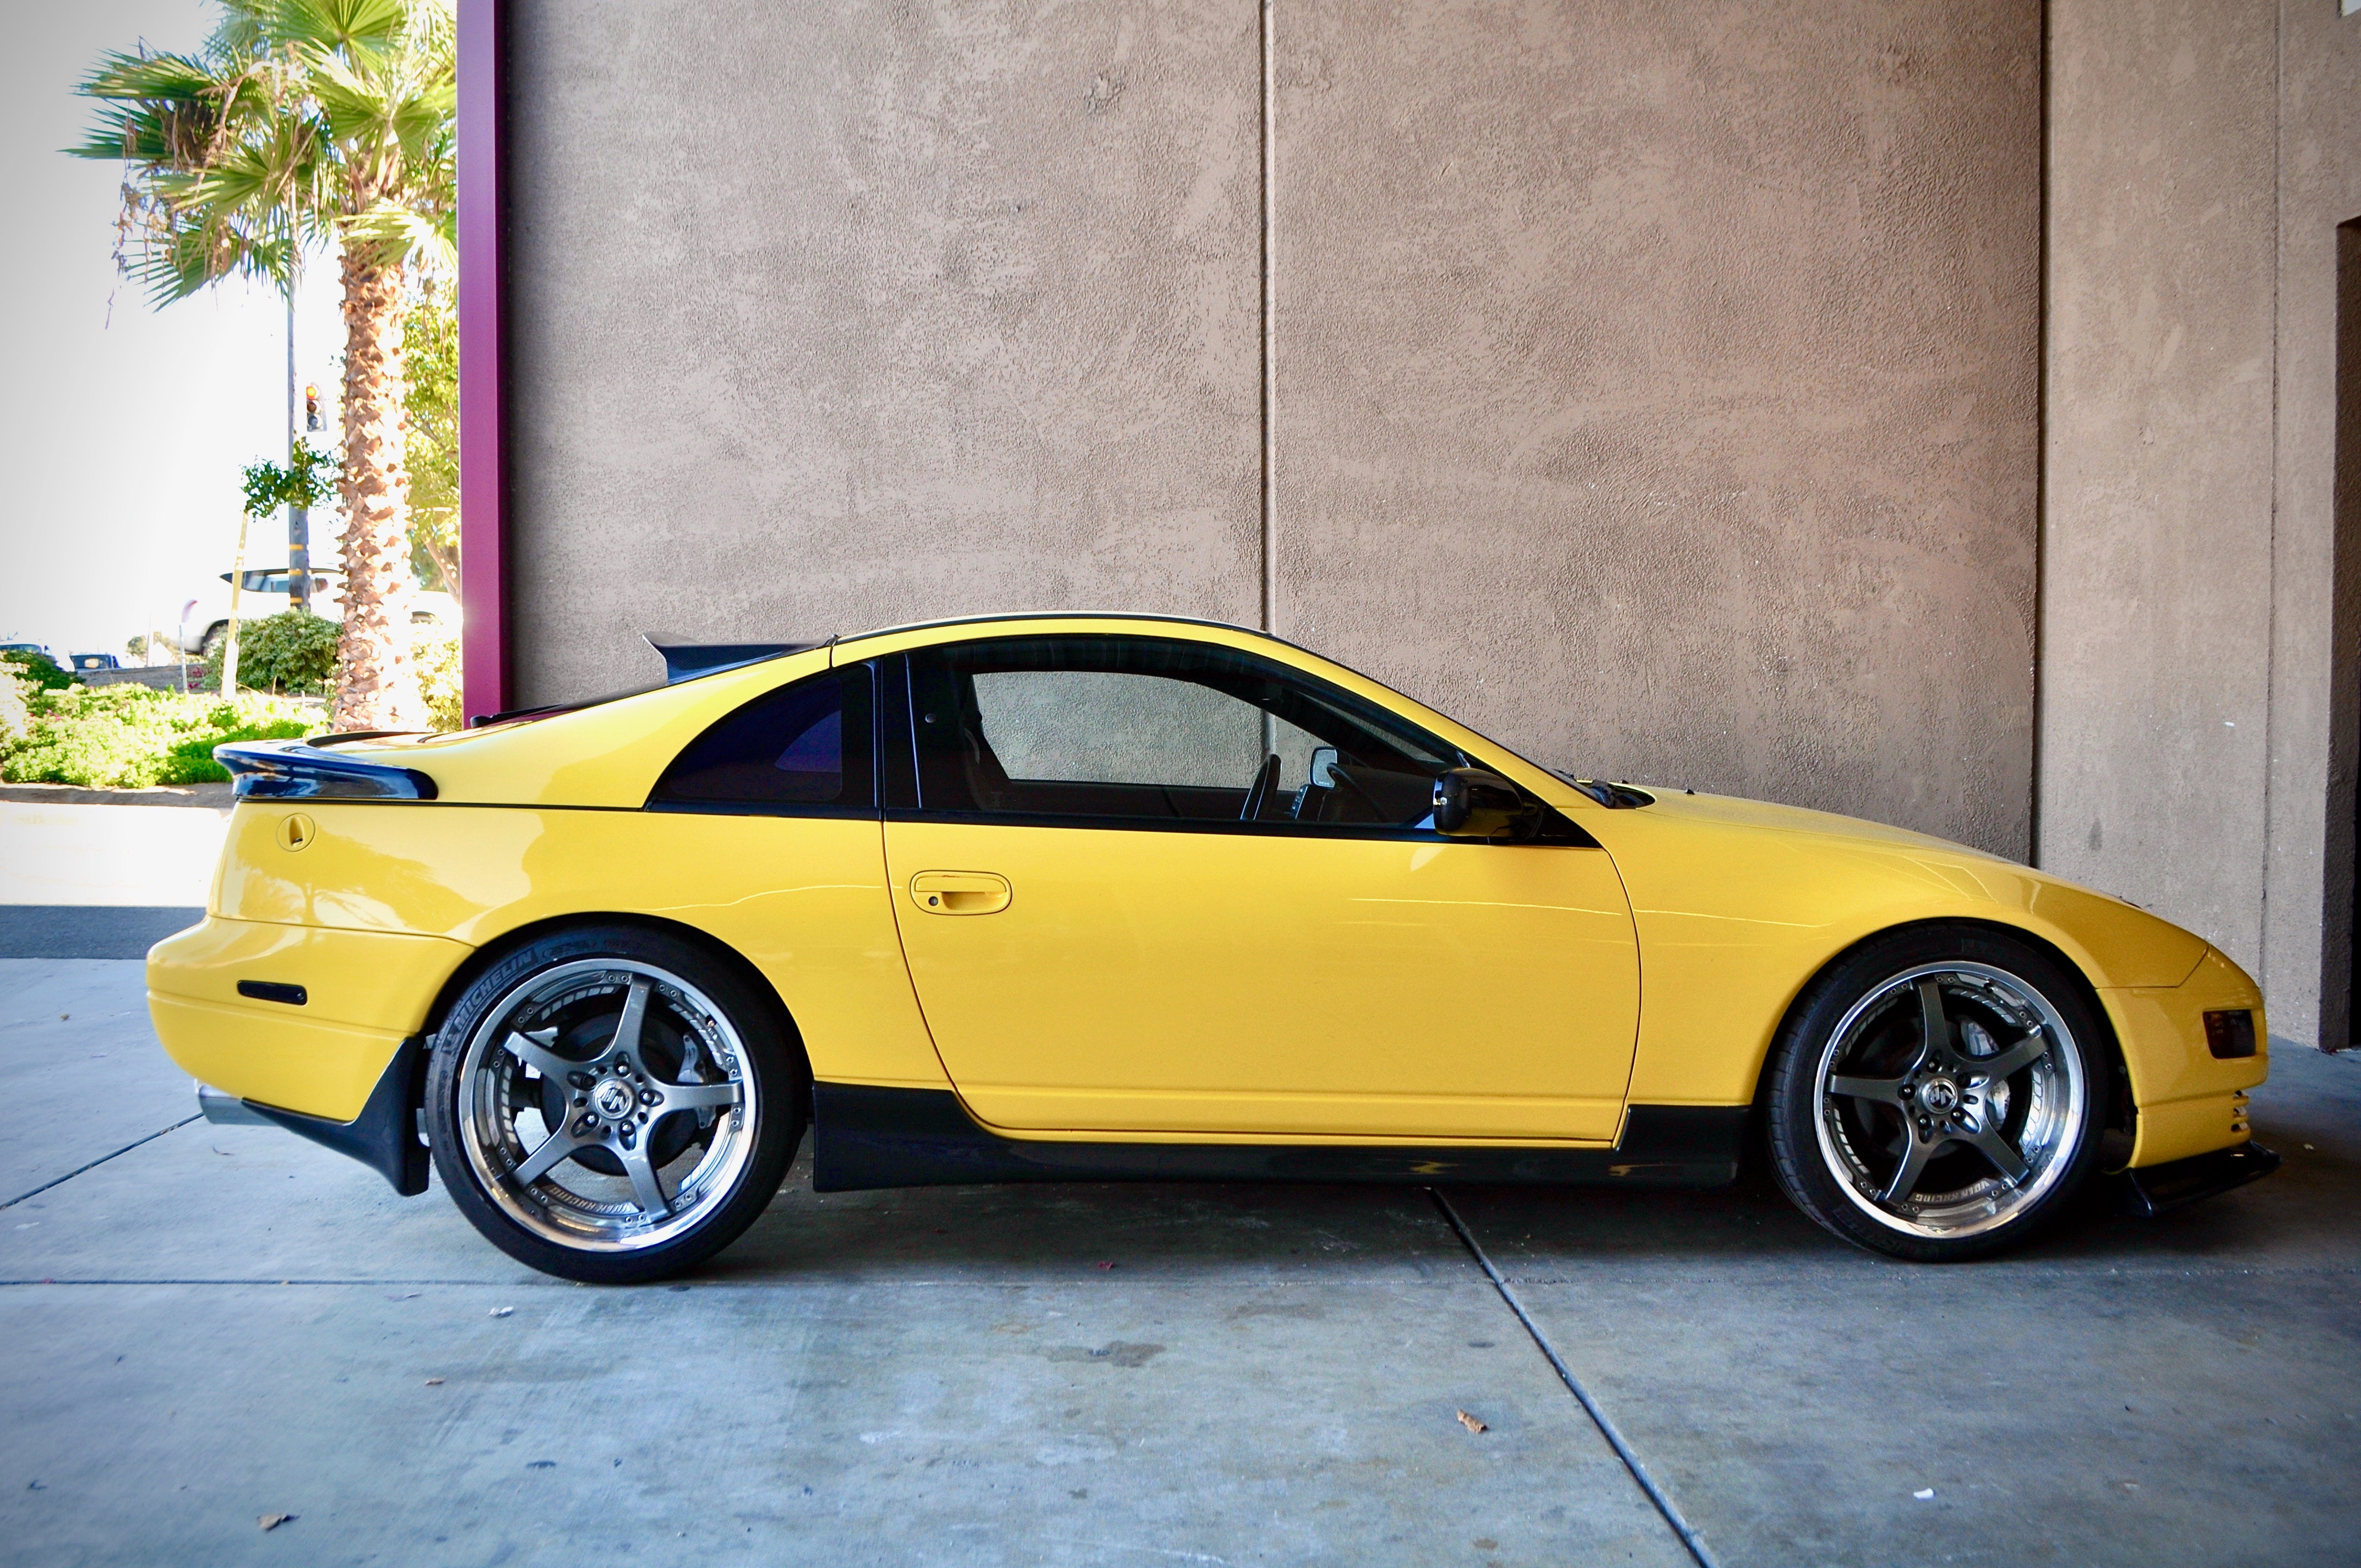 TAX REFUND SALE. 300zx 99 J spec replica side skirts for the 2+0 